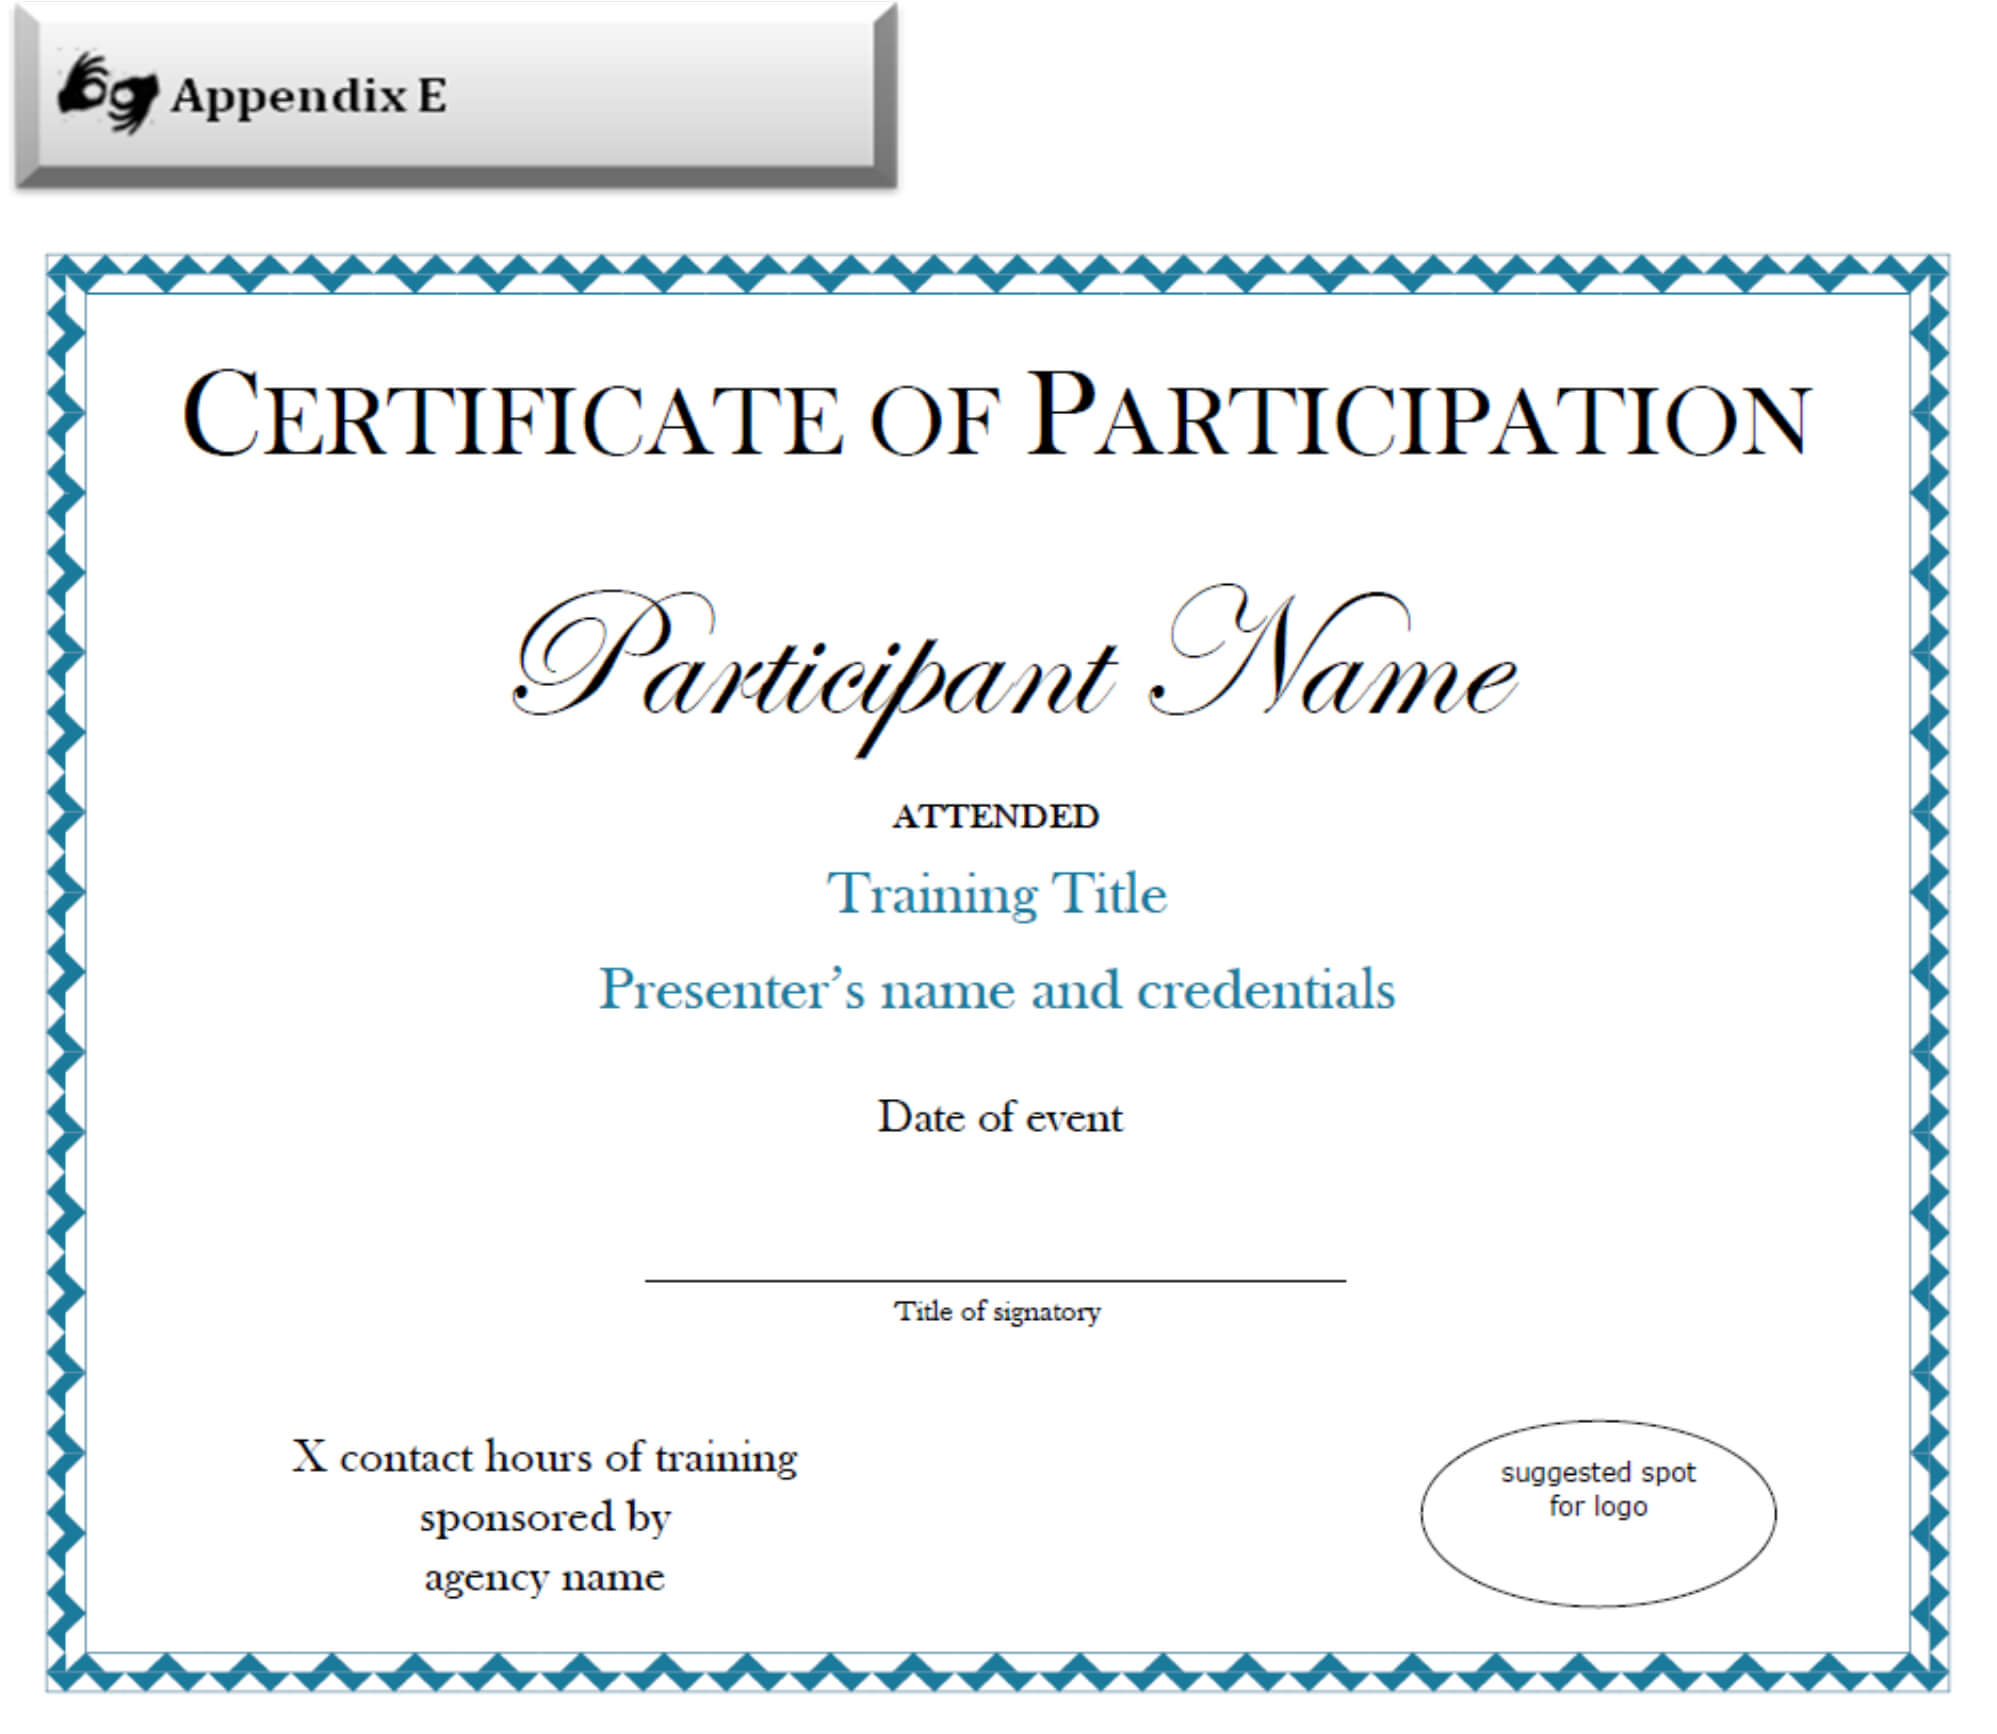 Certificate Of Participation Sample Free Download Intended For Sample Certificate Of Participation Template